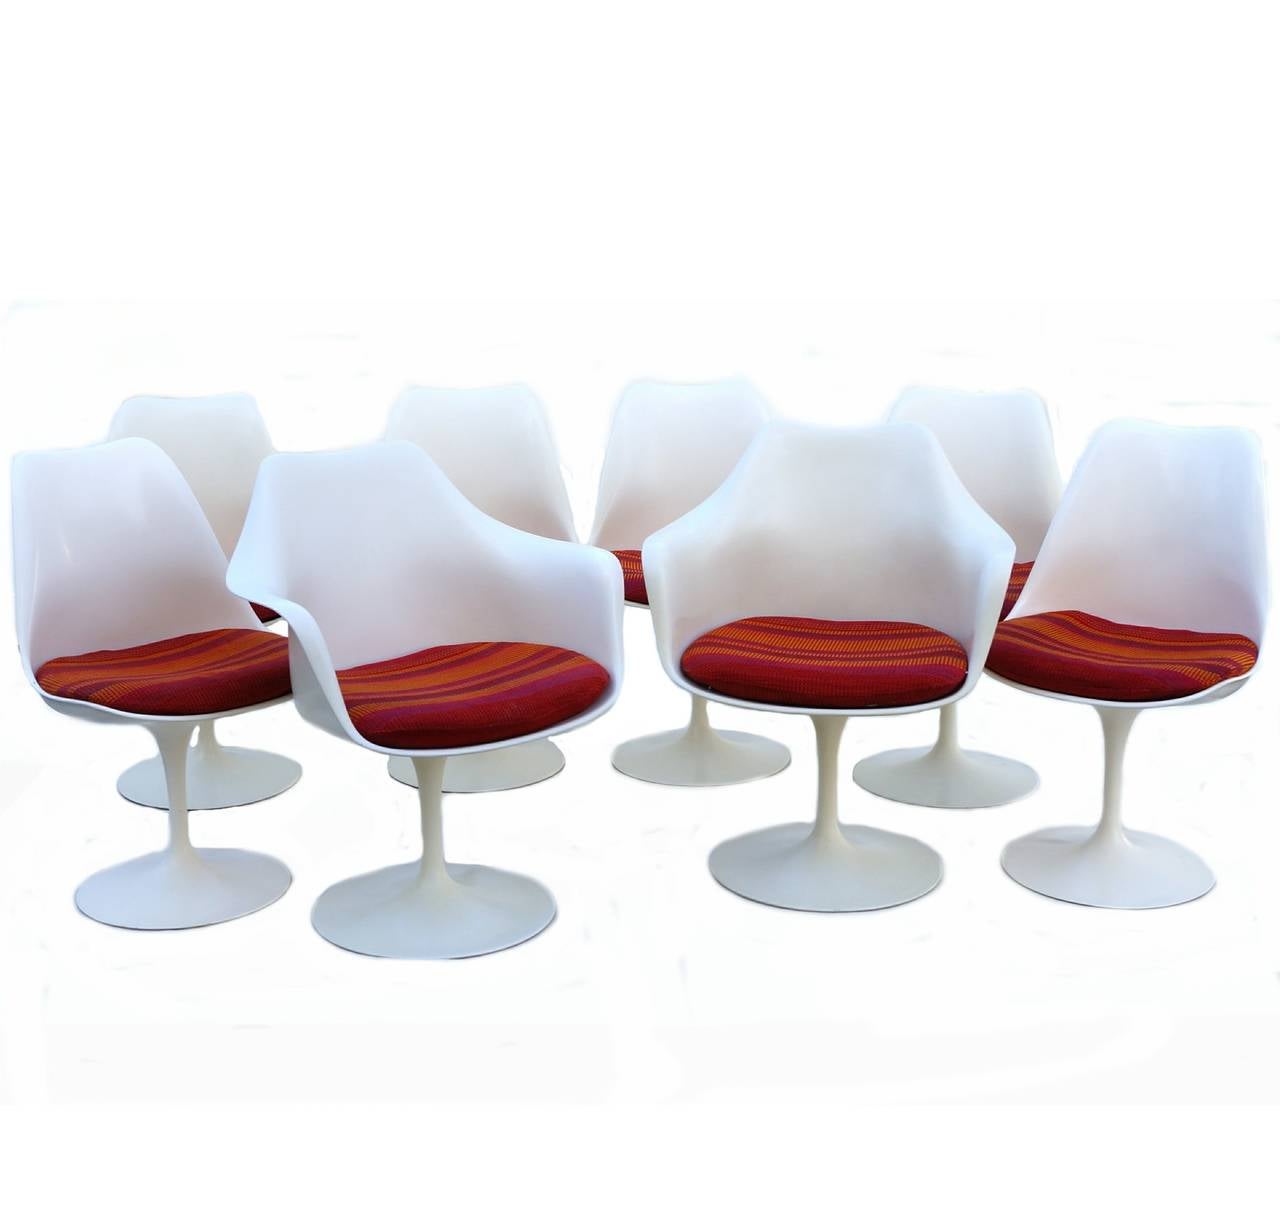 This is a set of eight Knoll tulip base chairs. Standard, non-swivel. Two armchairs, six side chairs. Six have the older 1960s label. Two of the side chairs are from the 1979. They measure approximately 31.5